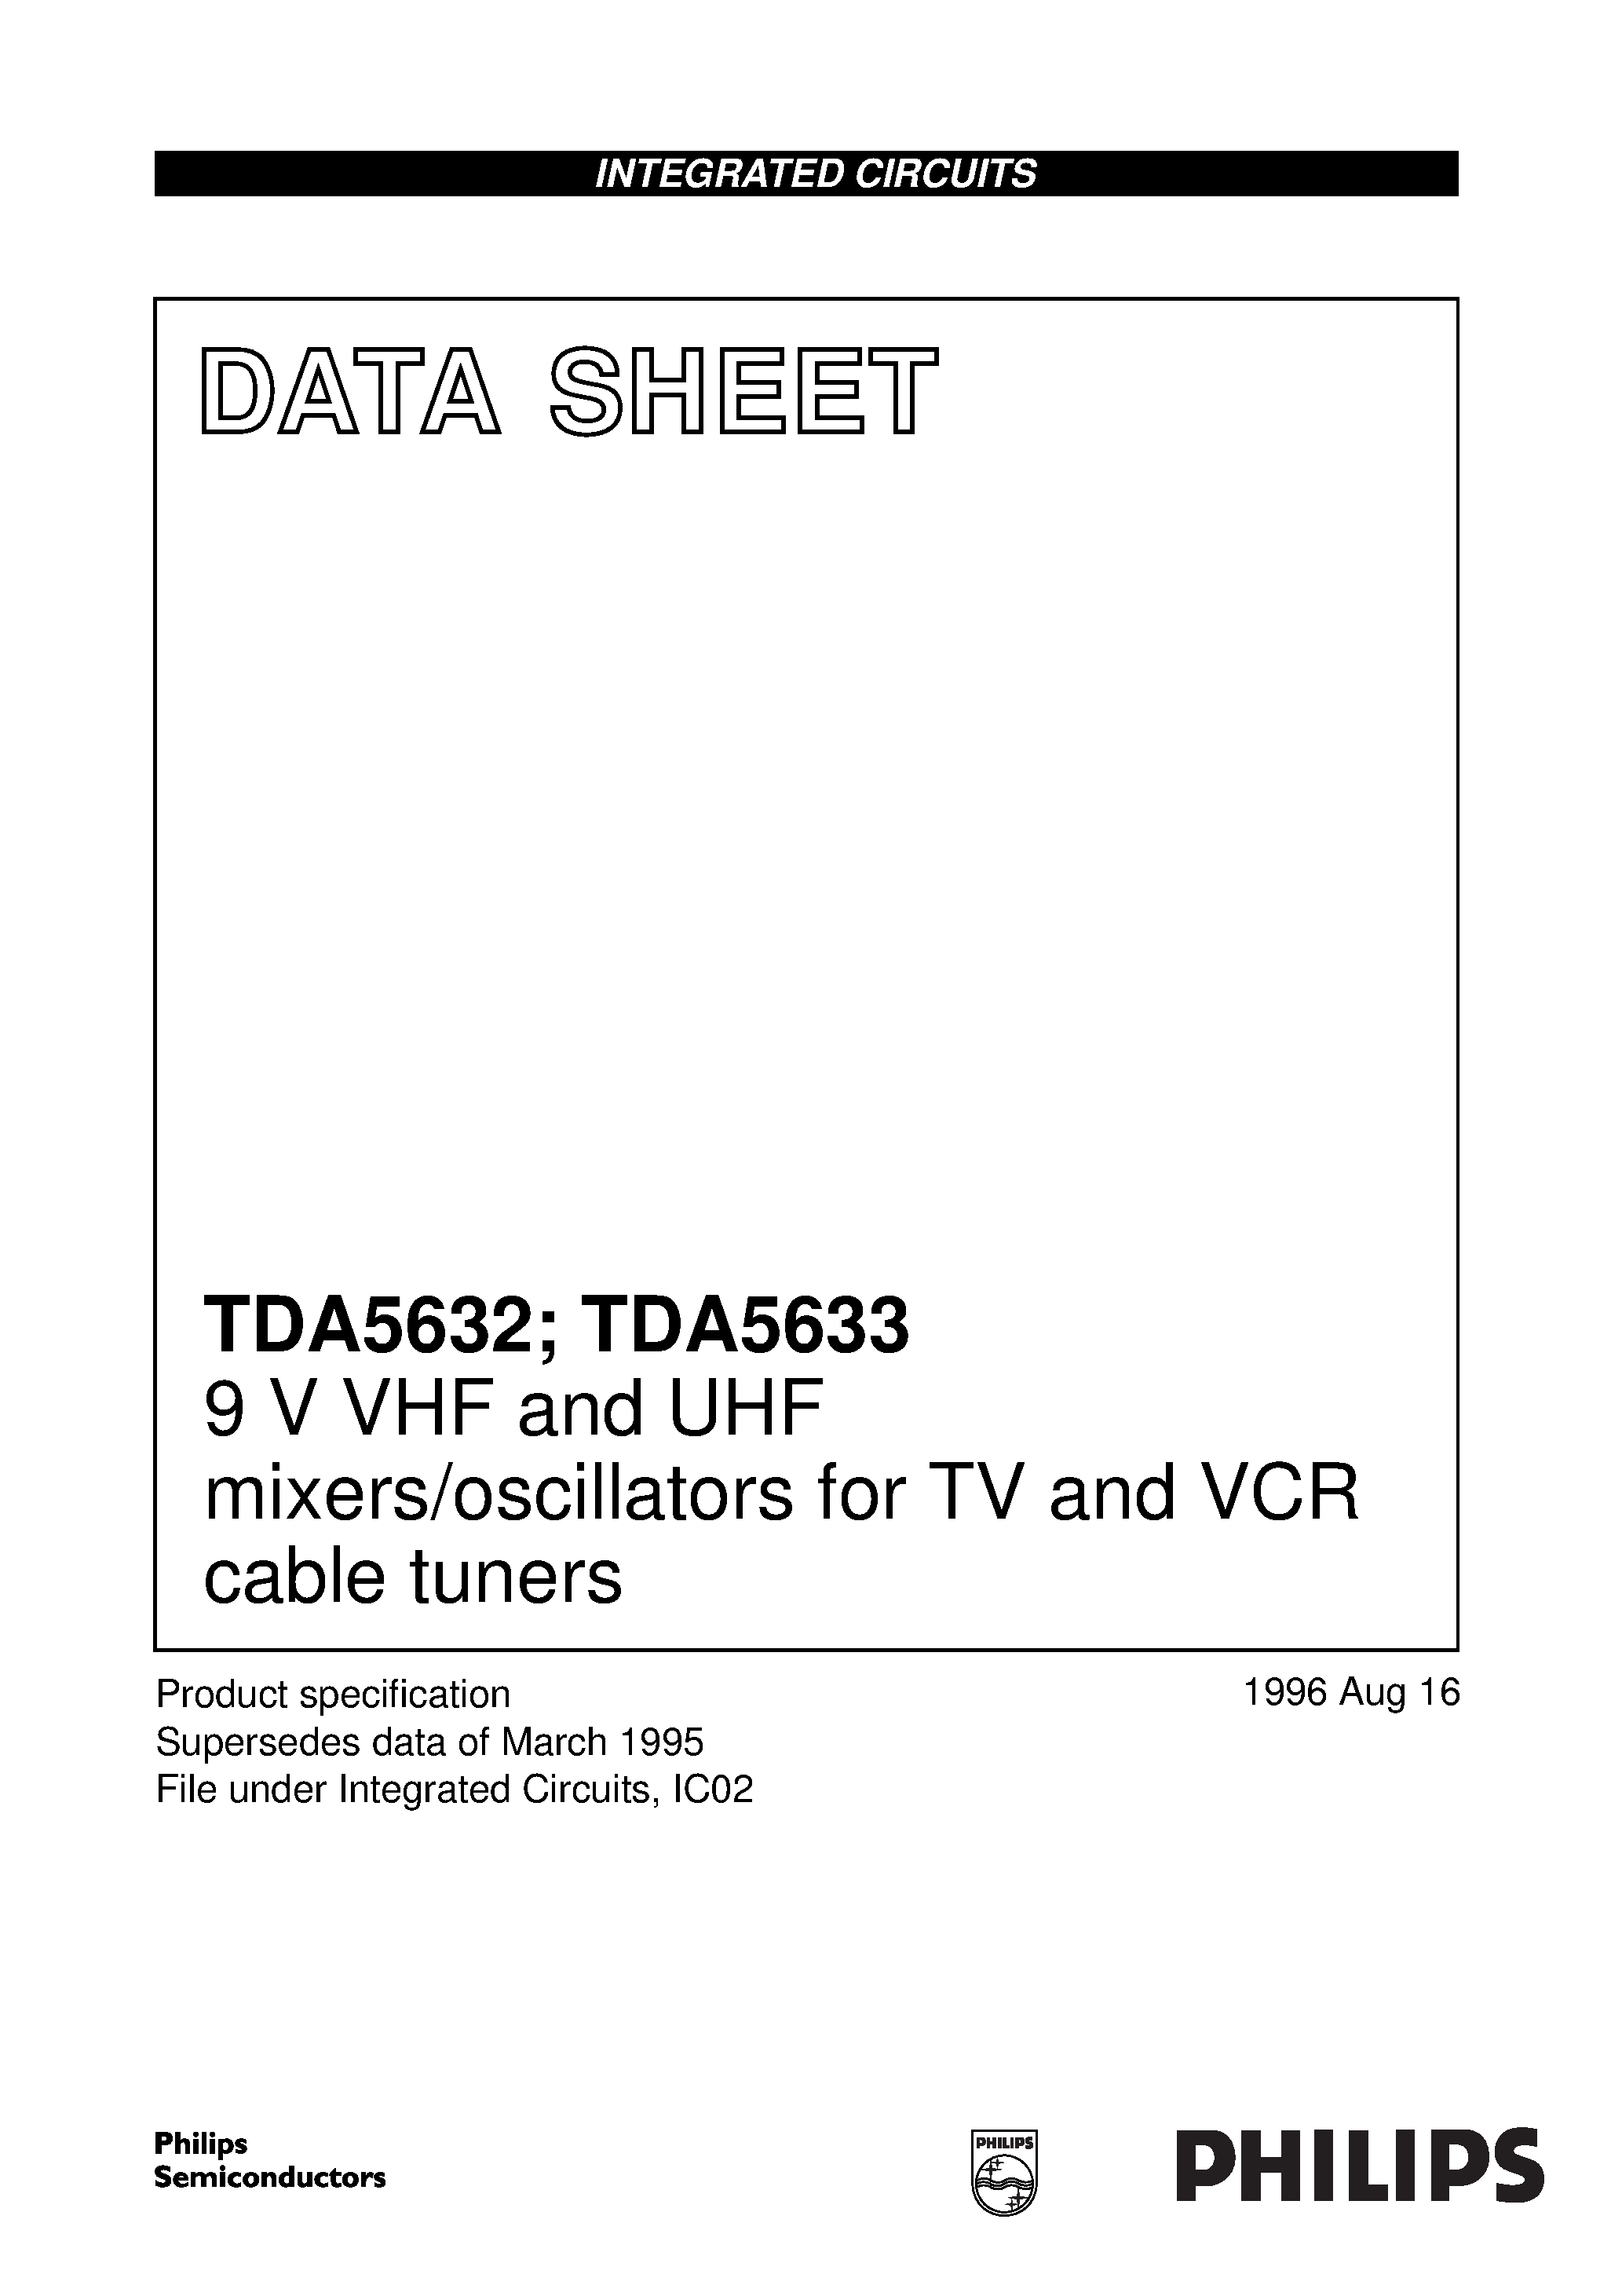 Datasheet TDA5632T - 9 V VHF and UHF mixers/oscillators for TV and VCR cable tuners page 1